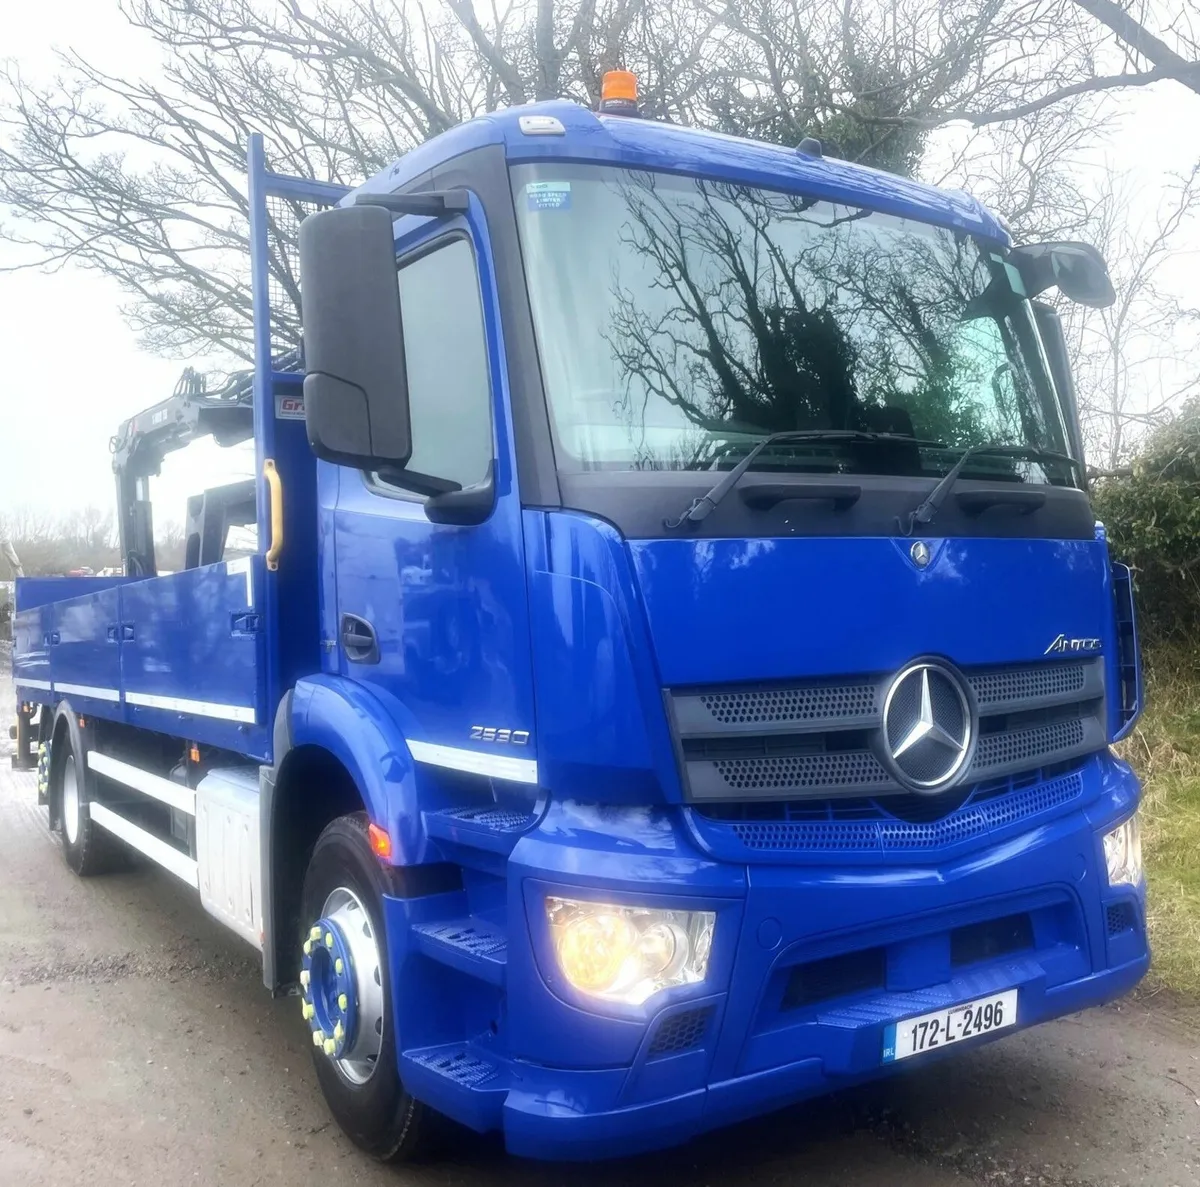 Commercial Vehicle  Painting,  Gray Enfield